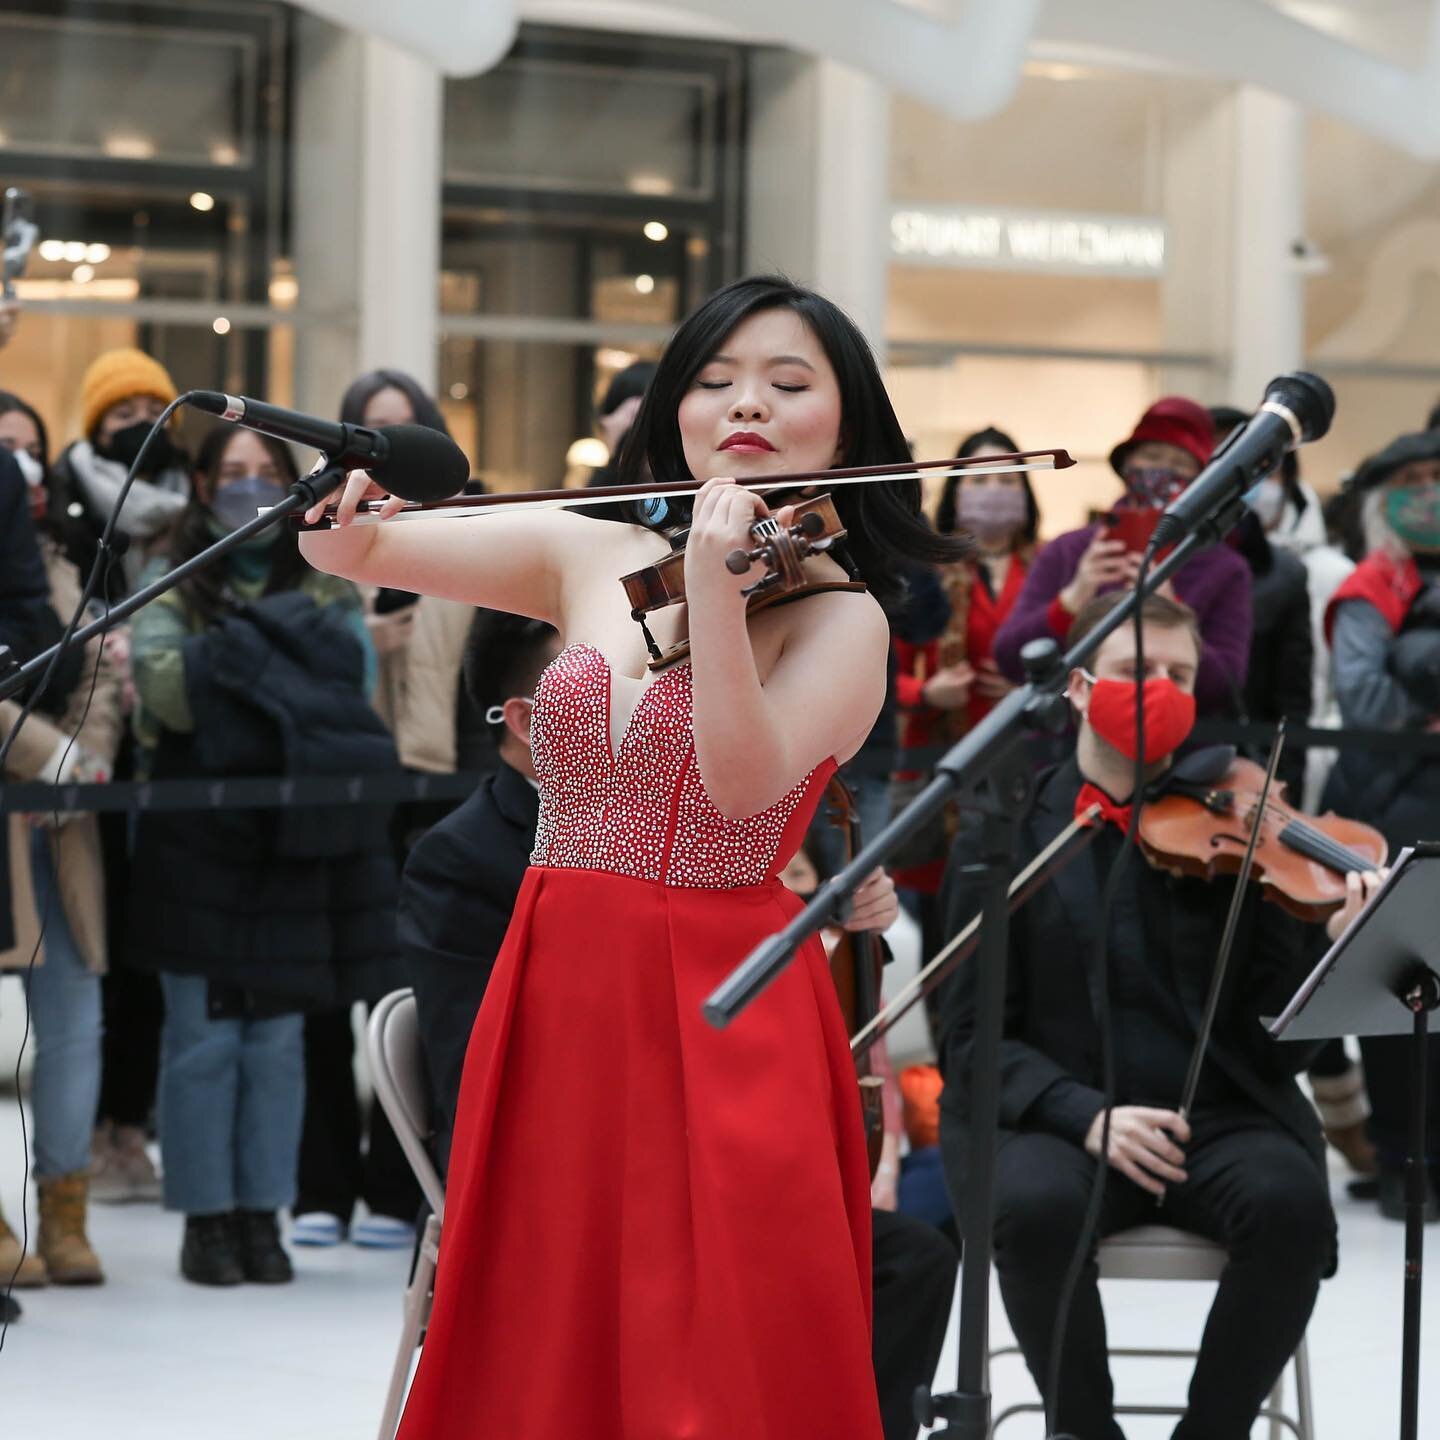 We were delighted to have Violinist Liao Pei-Wen @peiwenviolinist at the Oculus Musical Performance. 

About Liao Pei-Wen: Violinist Liao Pei-Wen, a Si-Yo Artist, continues to be known as a &ldquo;compelling&rdquo; and &ldquo;deeply passionate&rdquo;